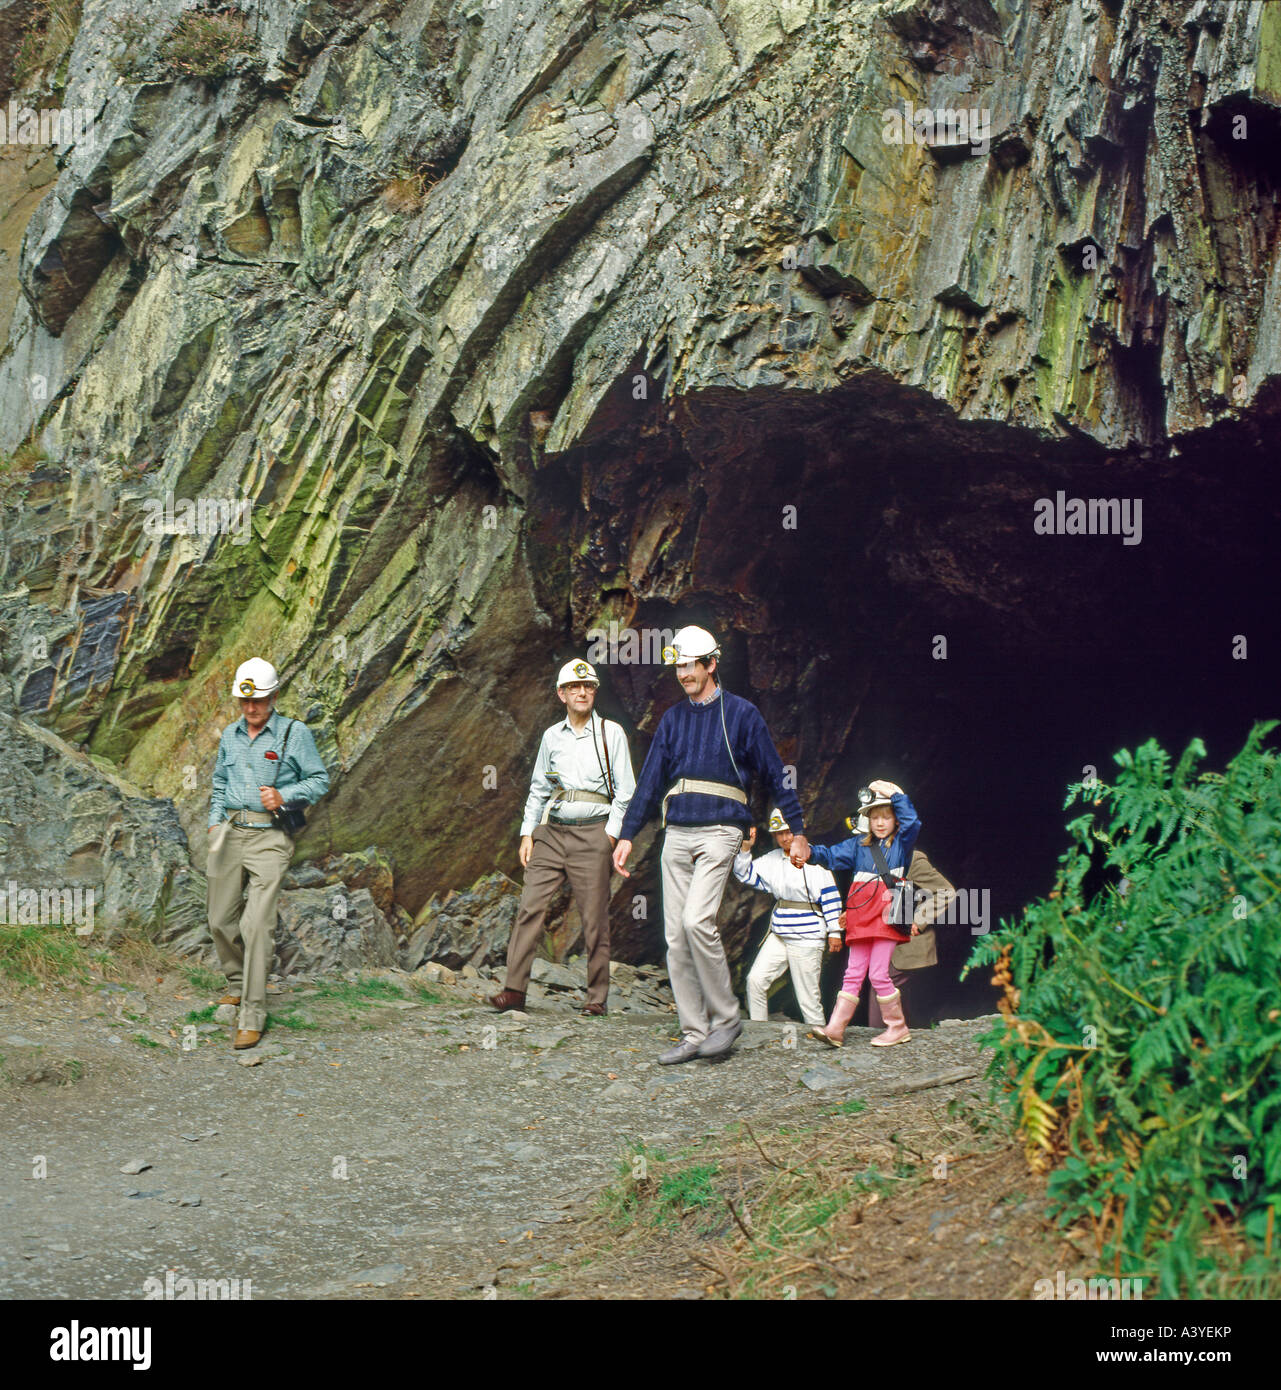 Family of visitors tourists outside an adit a cave at the Dolau Cothi Gold Mine in Pumpsaint, Llanwrda, Wales, UK  KATHY DEWITT Stock Photo